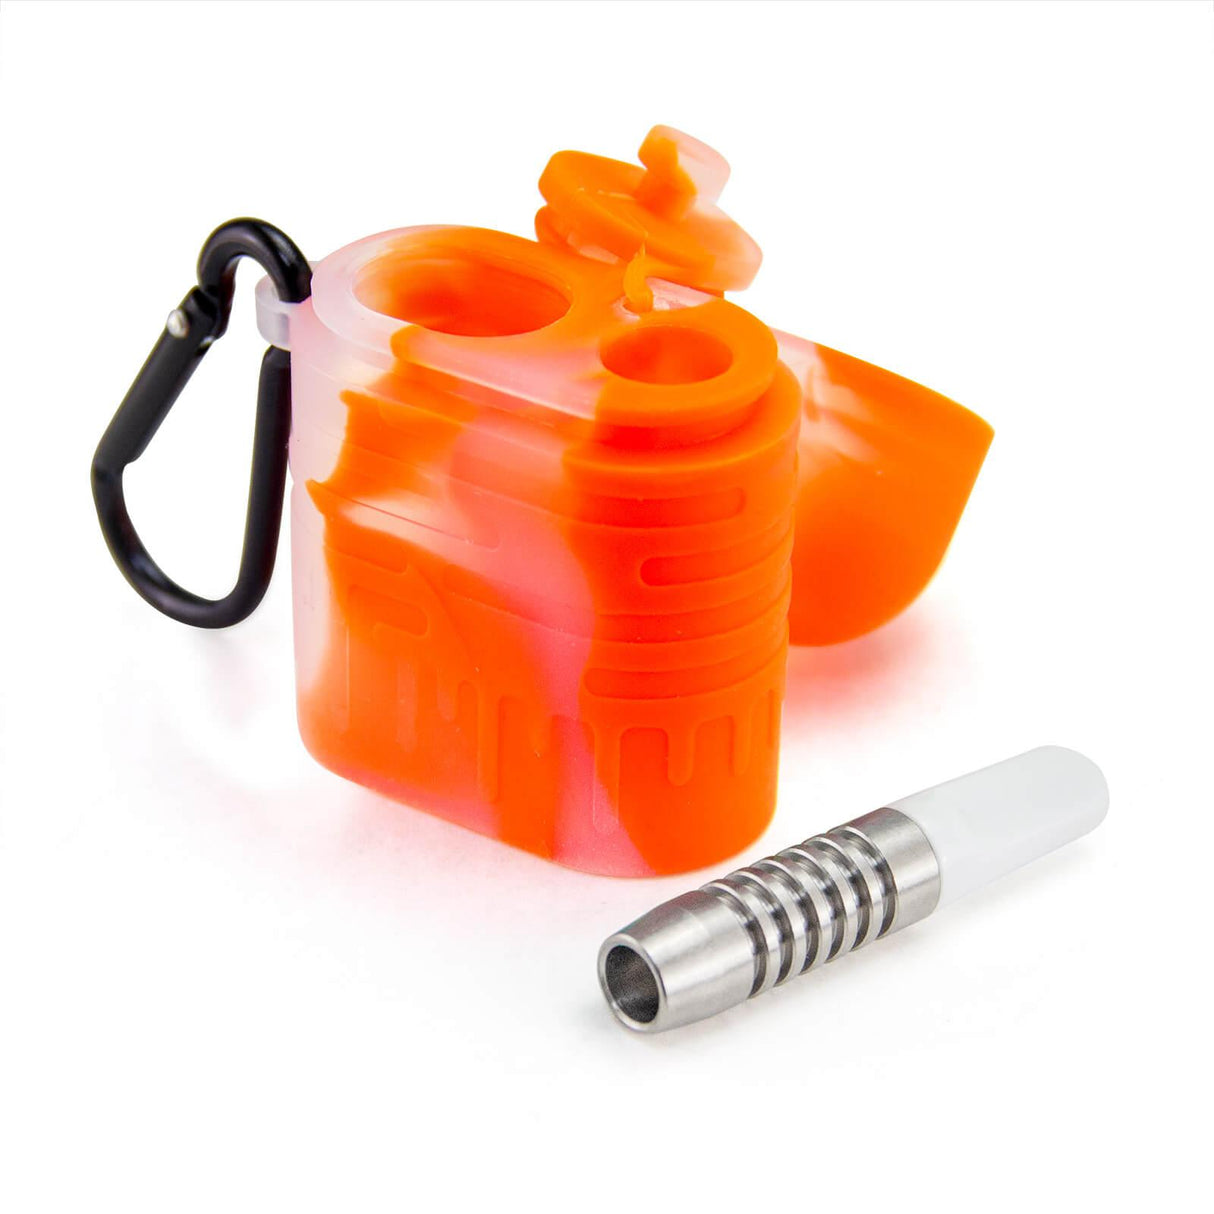 Orange Silicone One Hitter Dugout with Keychain by PILOT DIARY, Front View on White Background